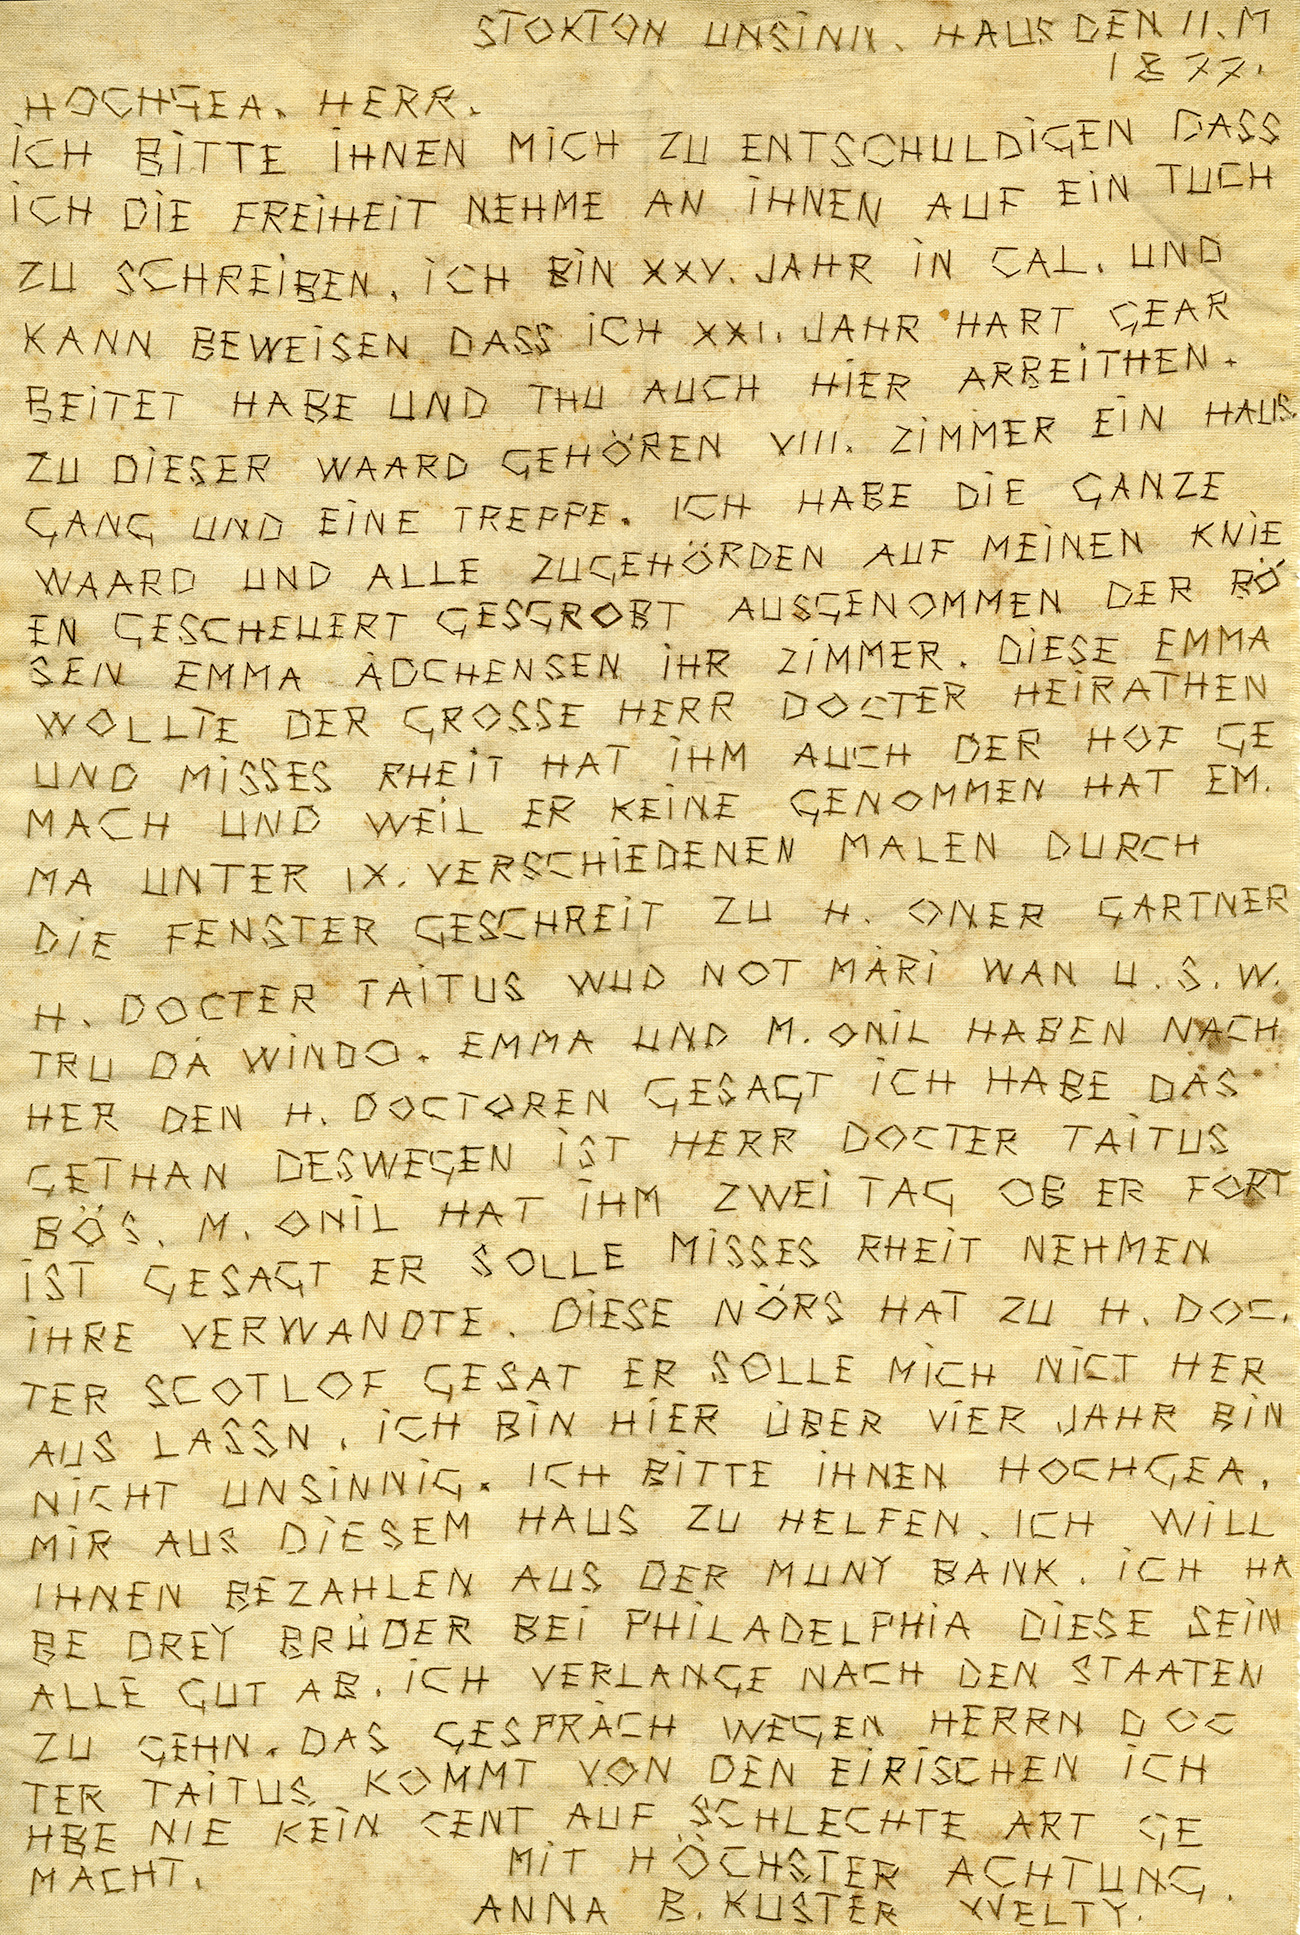 Sheet of cloth with hand-stitched text